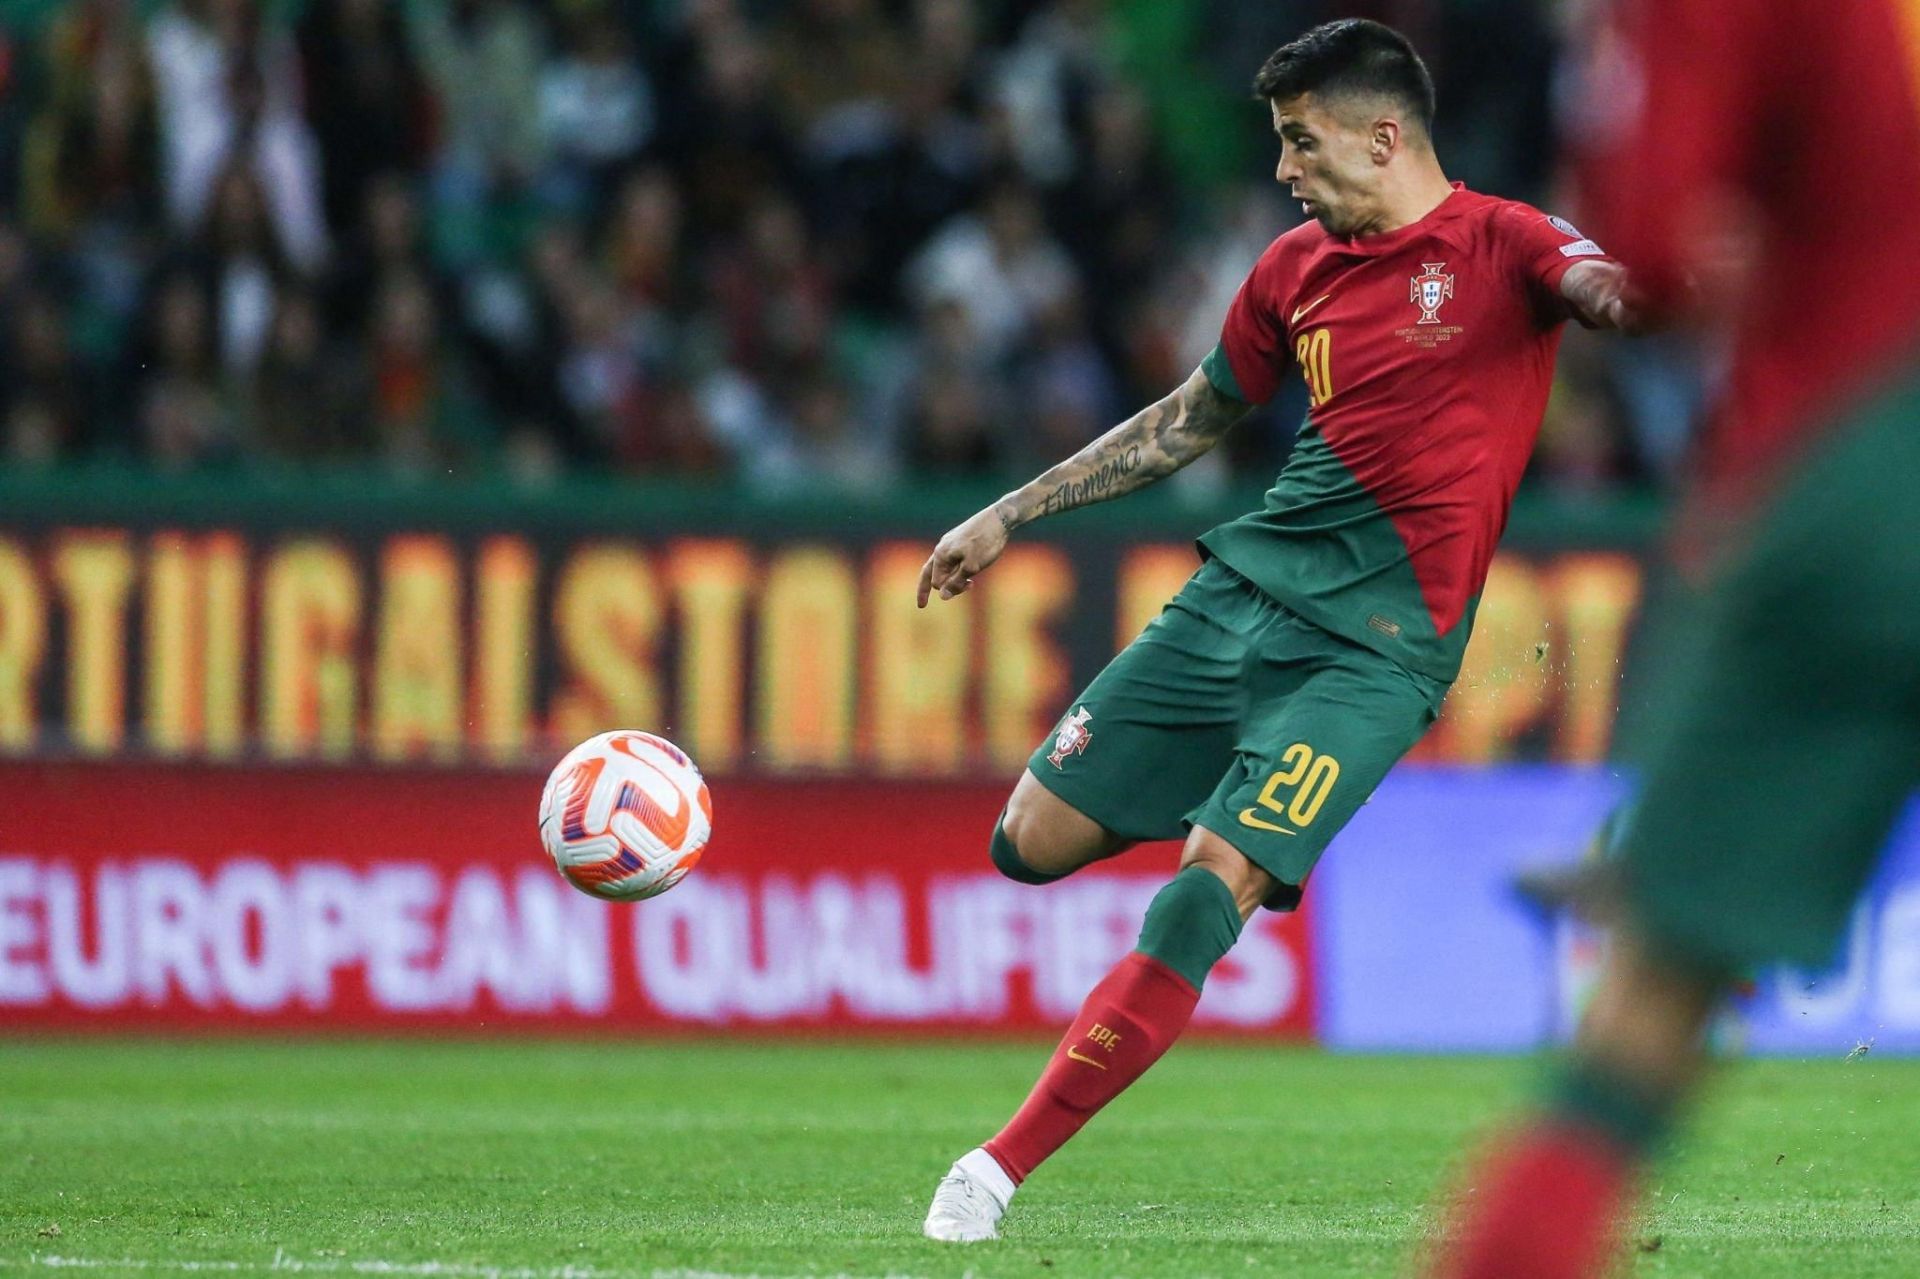 Joao Cancelo was superb for A Selecao in their win over Lichtenstein